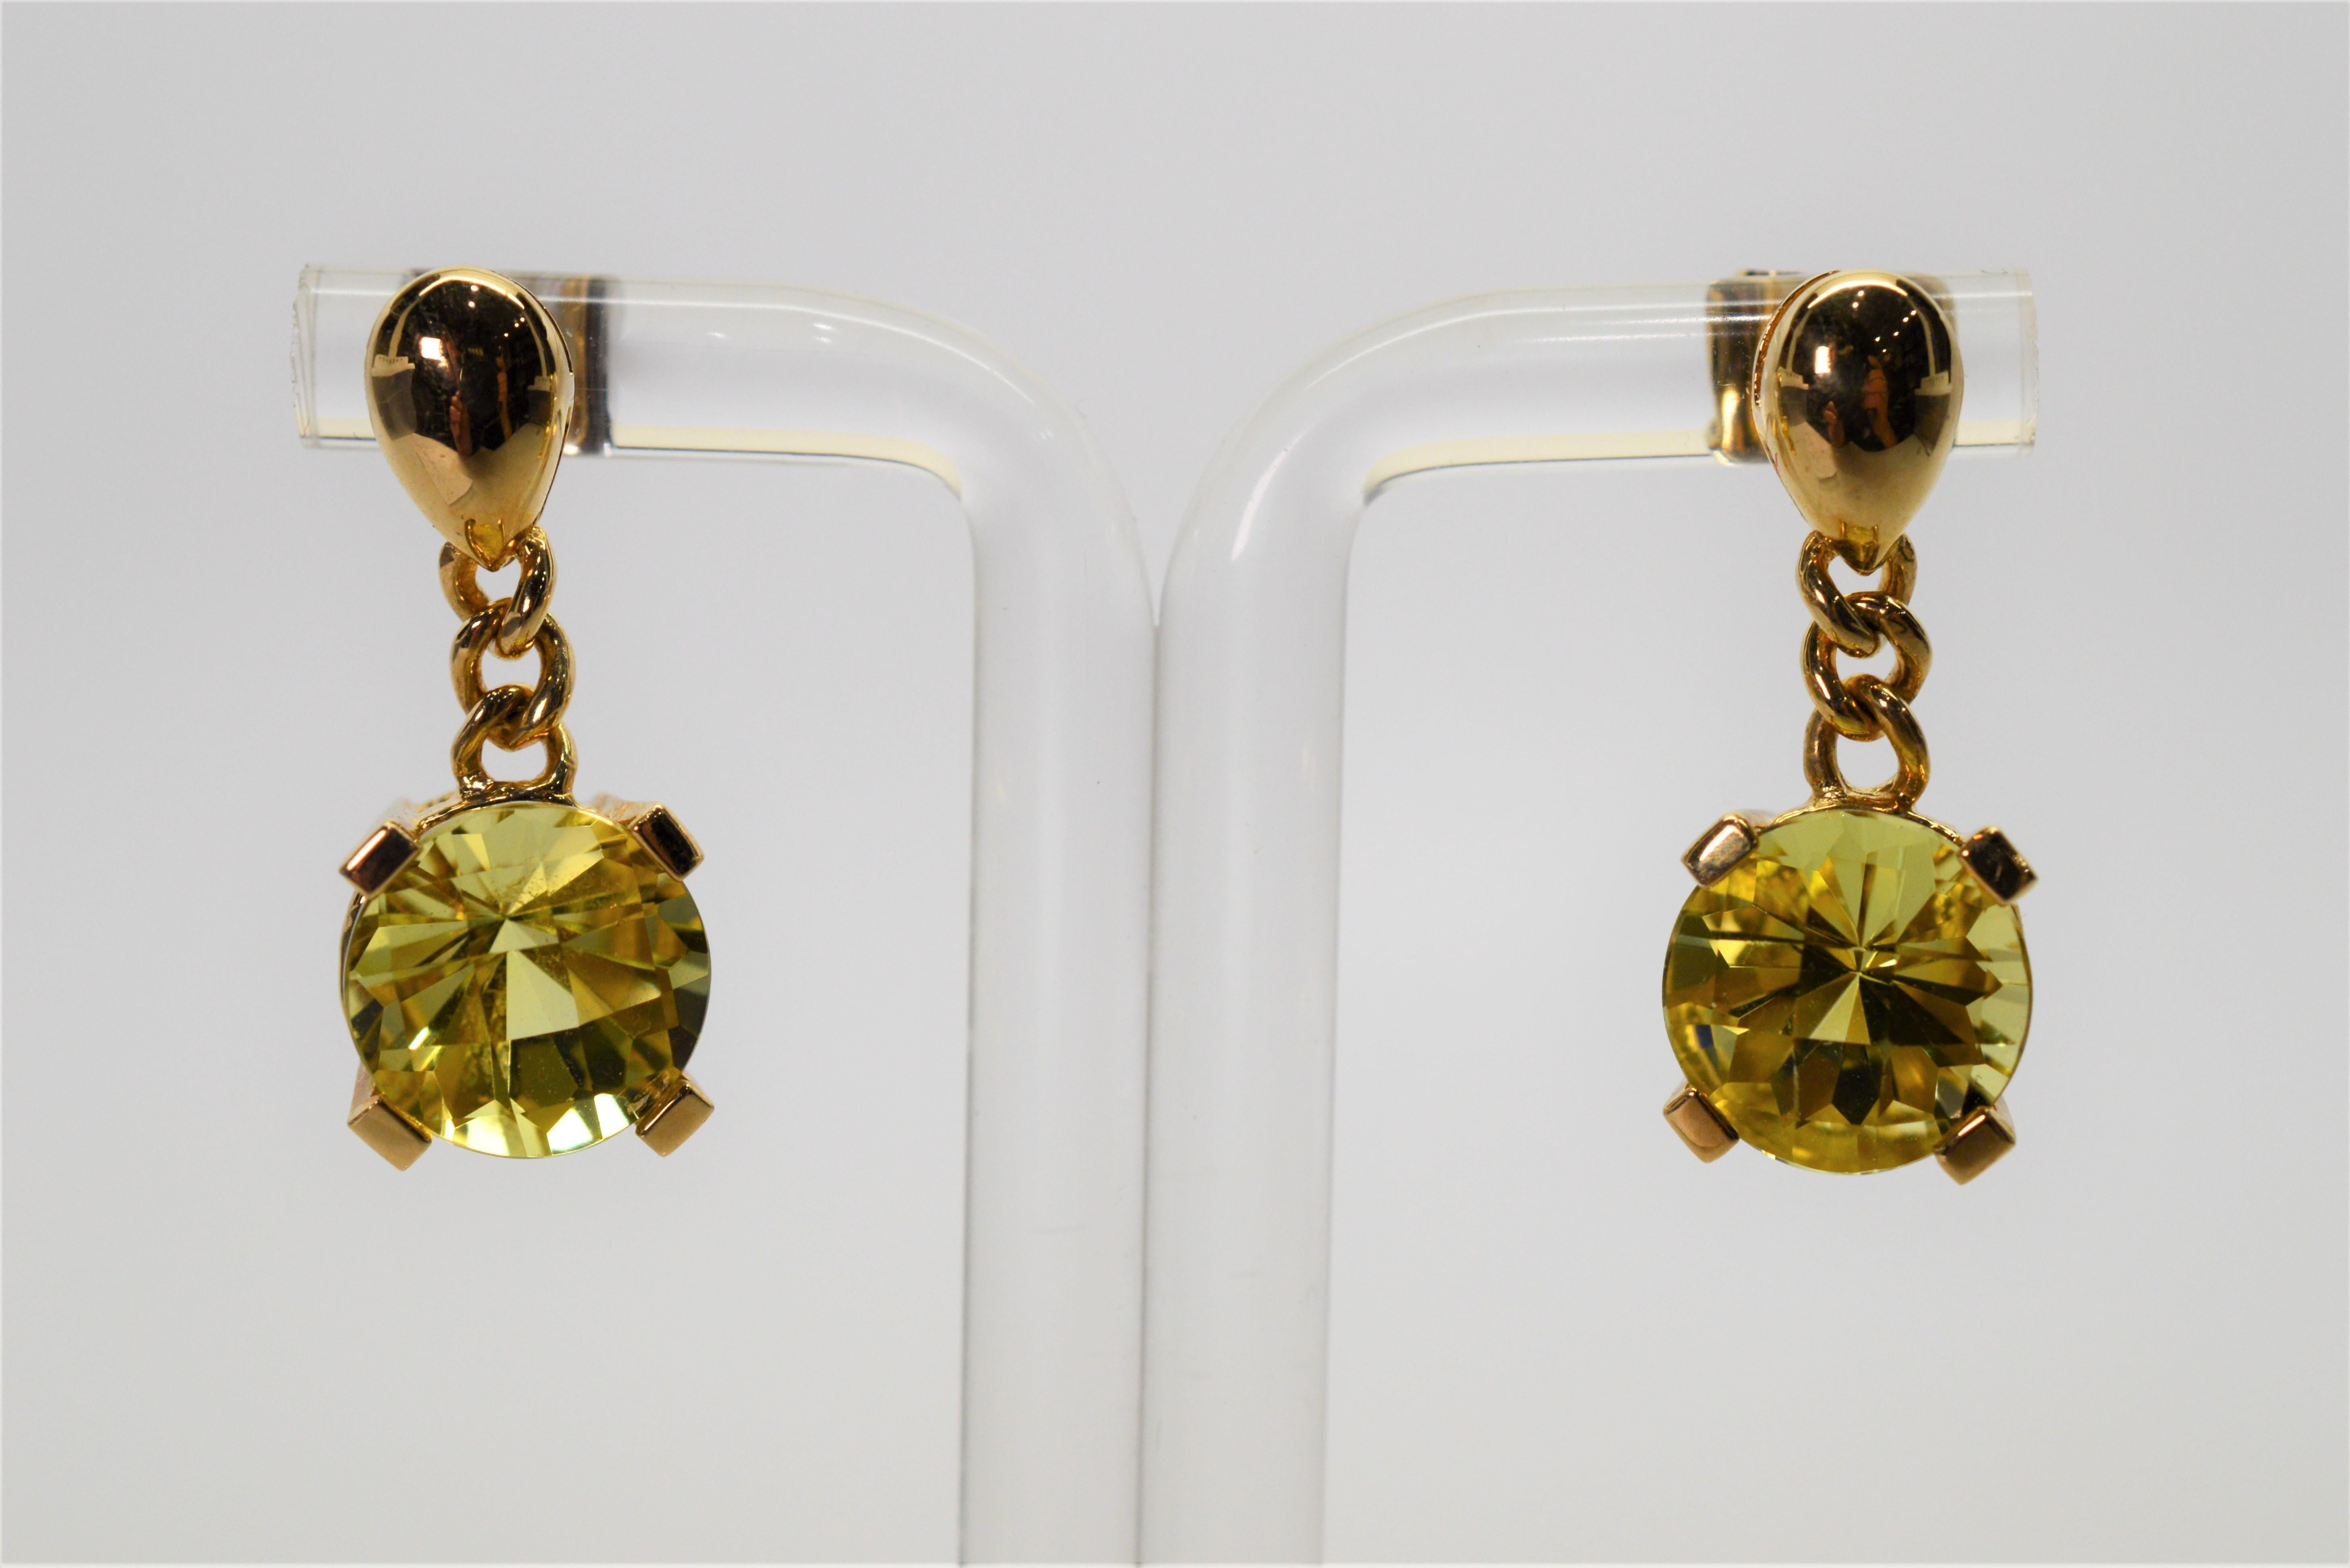 The natural citrine stones, complimented by rich fourteen carat yellow gold, make these earrings bright and energetic. For pieced ears with post backs, the drop is approximately 3/4 inch. Two 10 mm round citrine quartz stones, each more than three